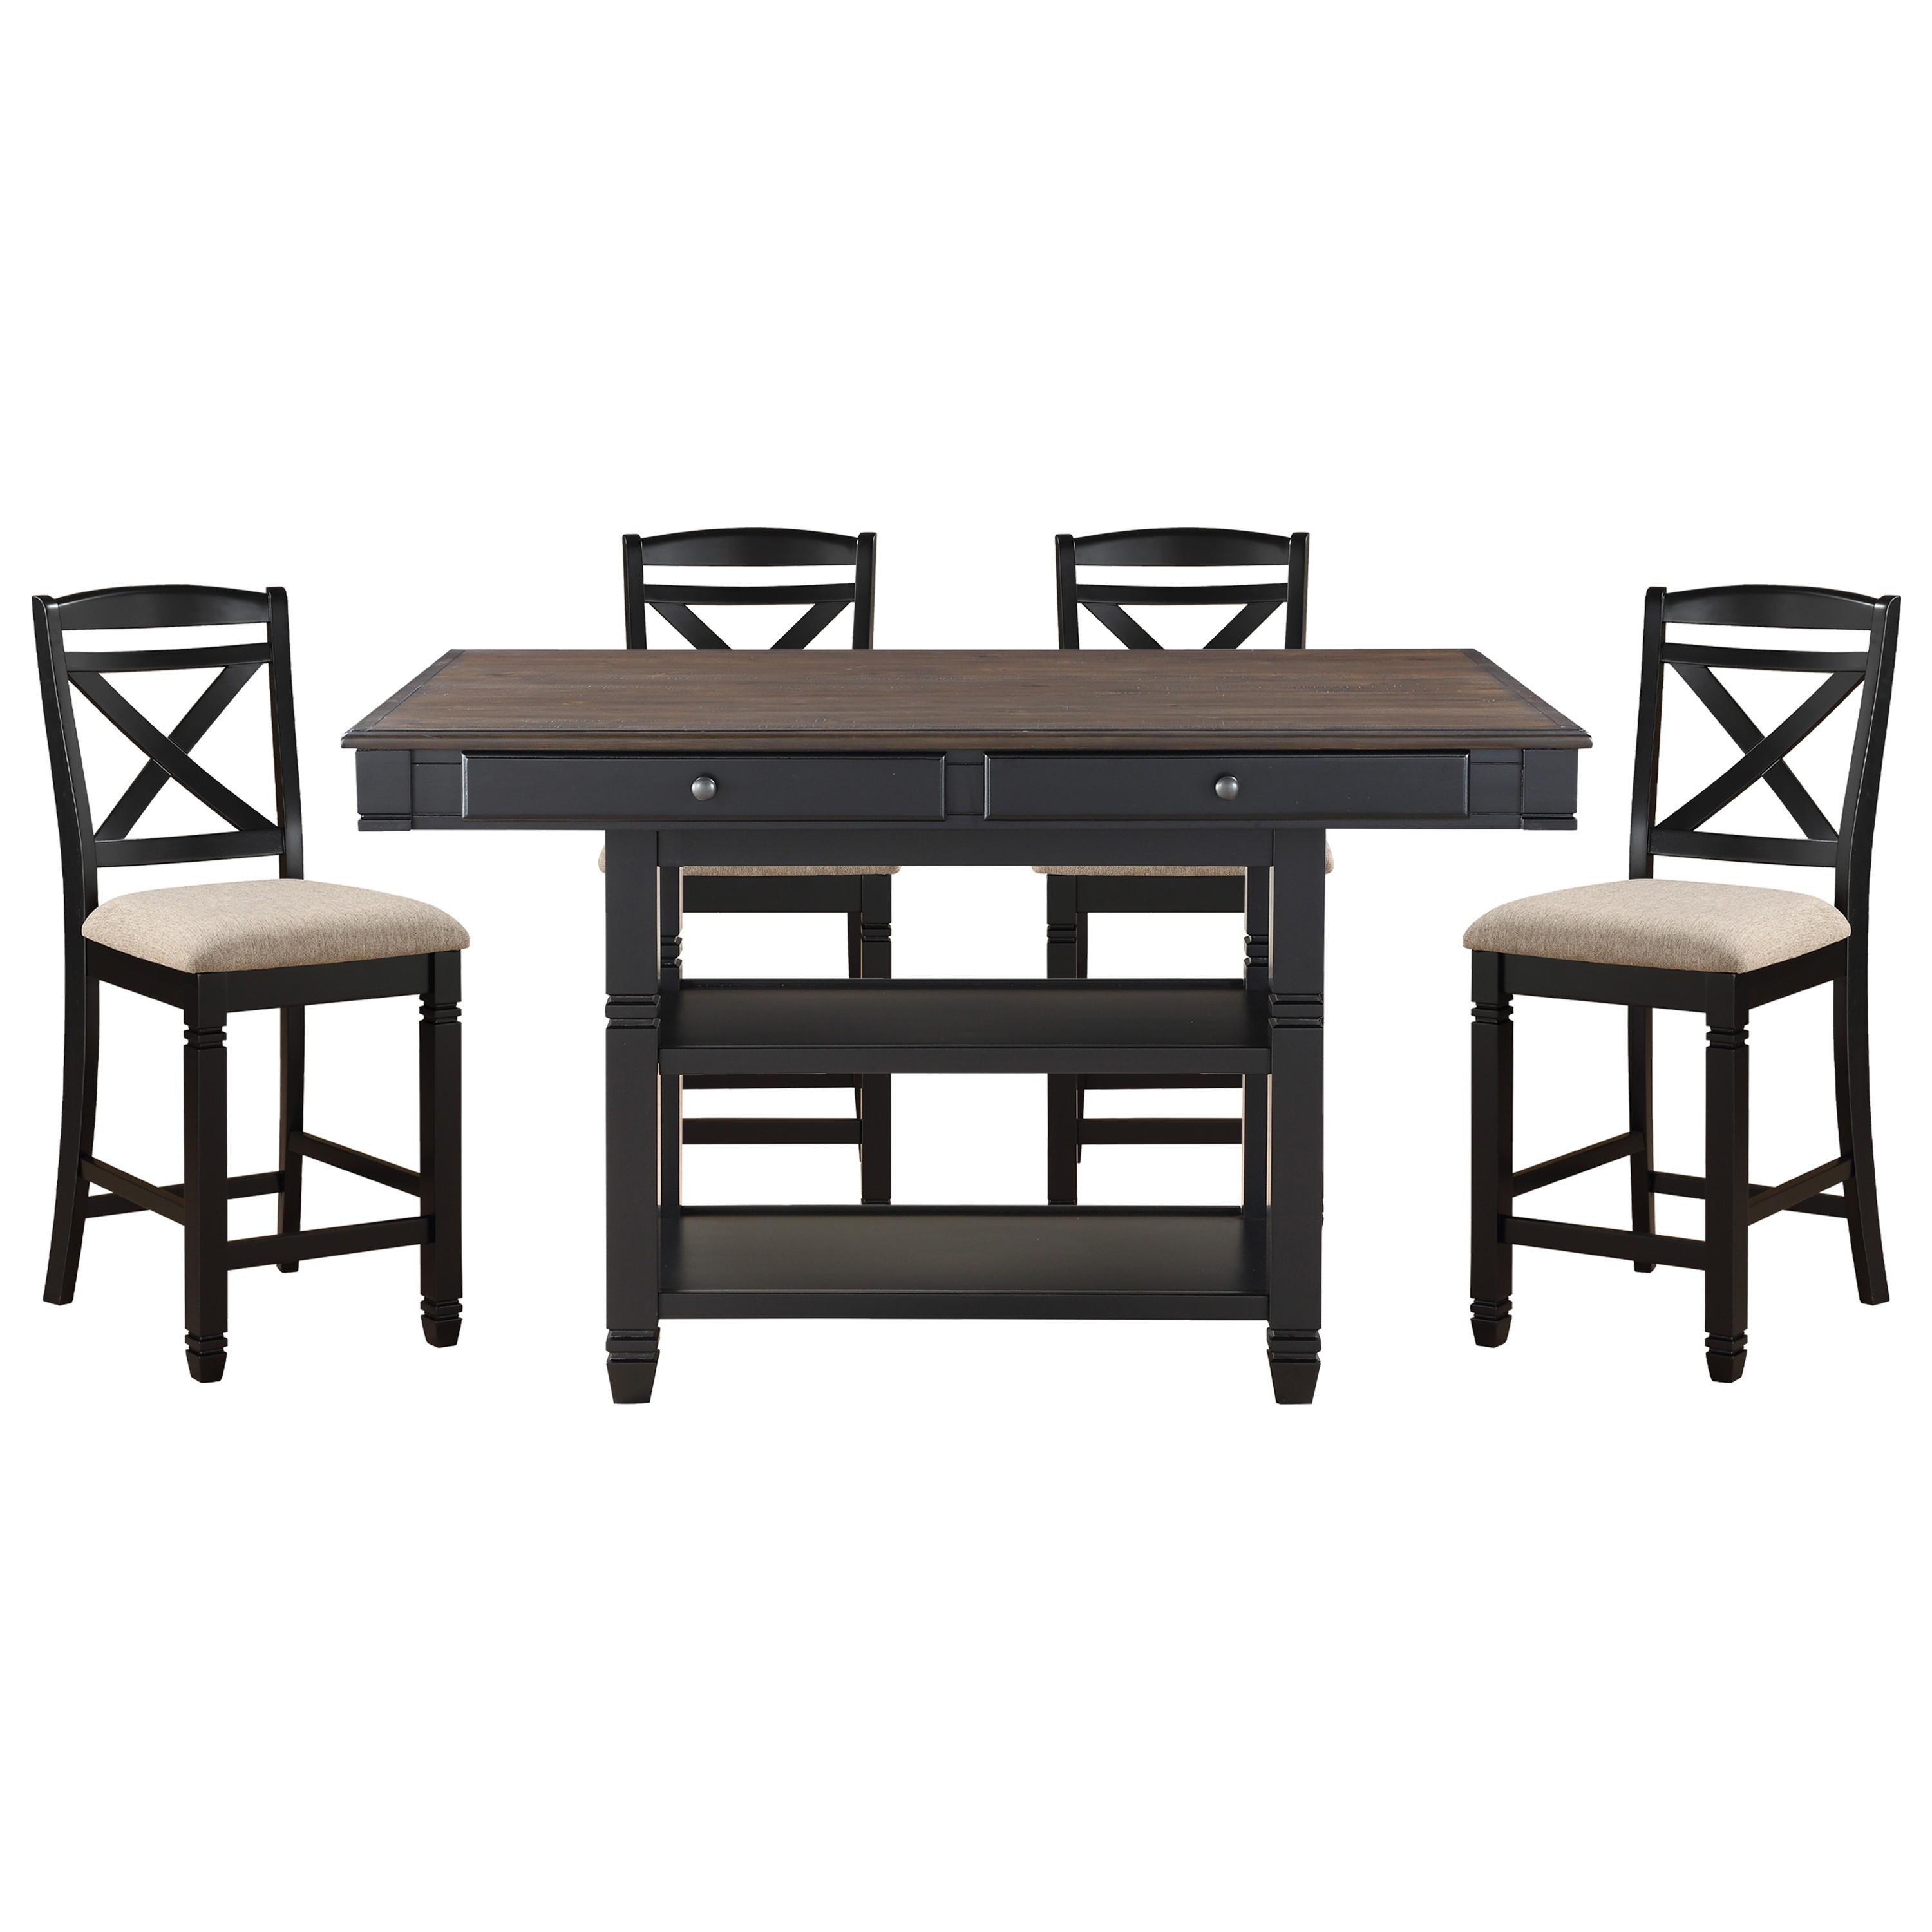 Transitional Dining Room Set 5705BK-36*5PC Baywater 5705BK-36*5PC in Black Polyester